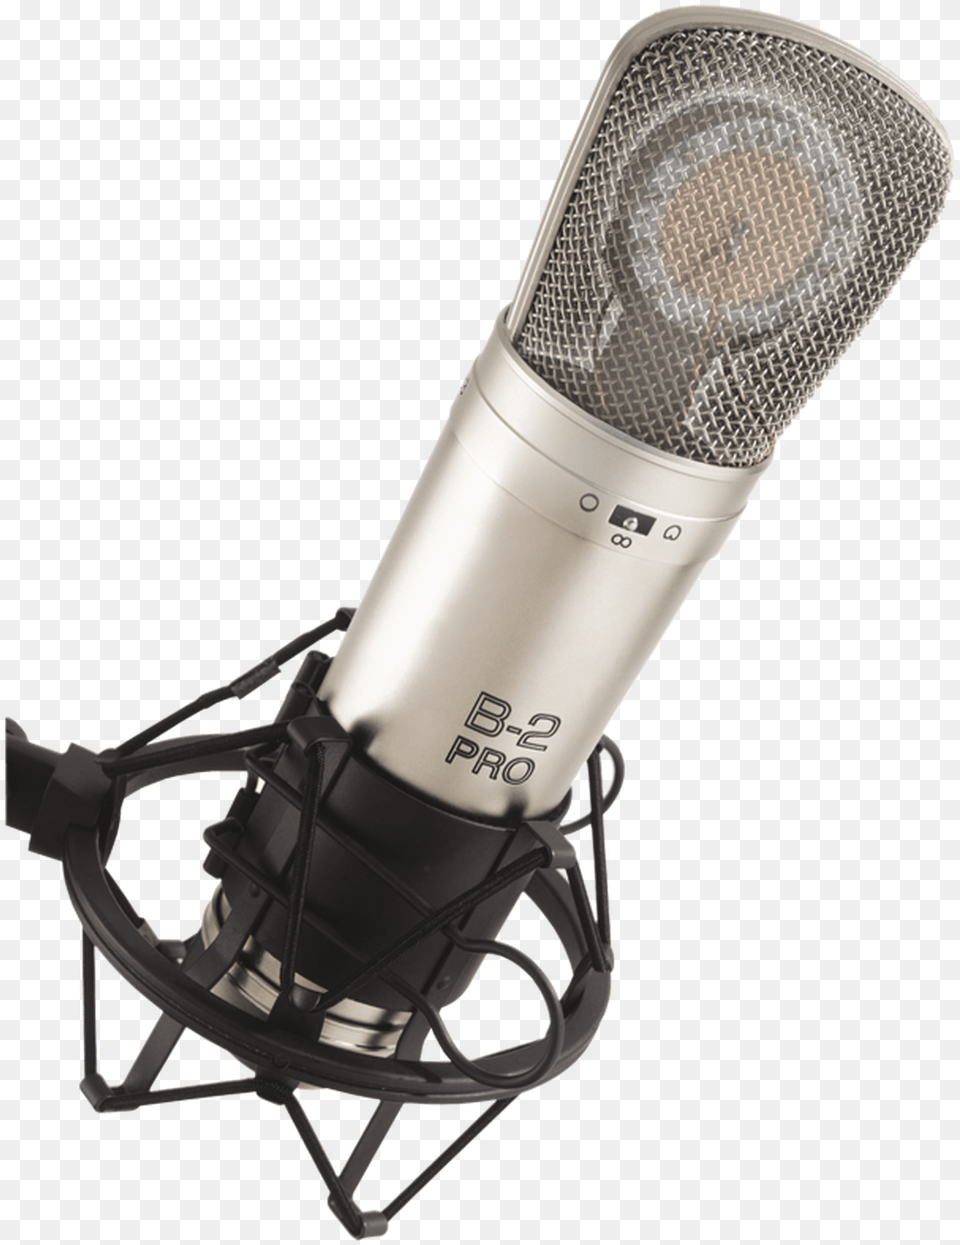 Behringer B2pro Dual Dia Studio Condenser Microphone Microfono Behringer Pro, Electrical Device, Appliance, Blow Dryer, Device Free Png Download